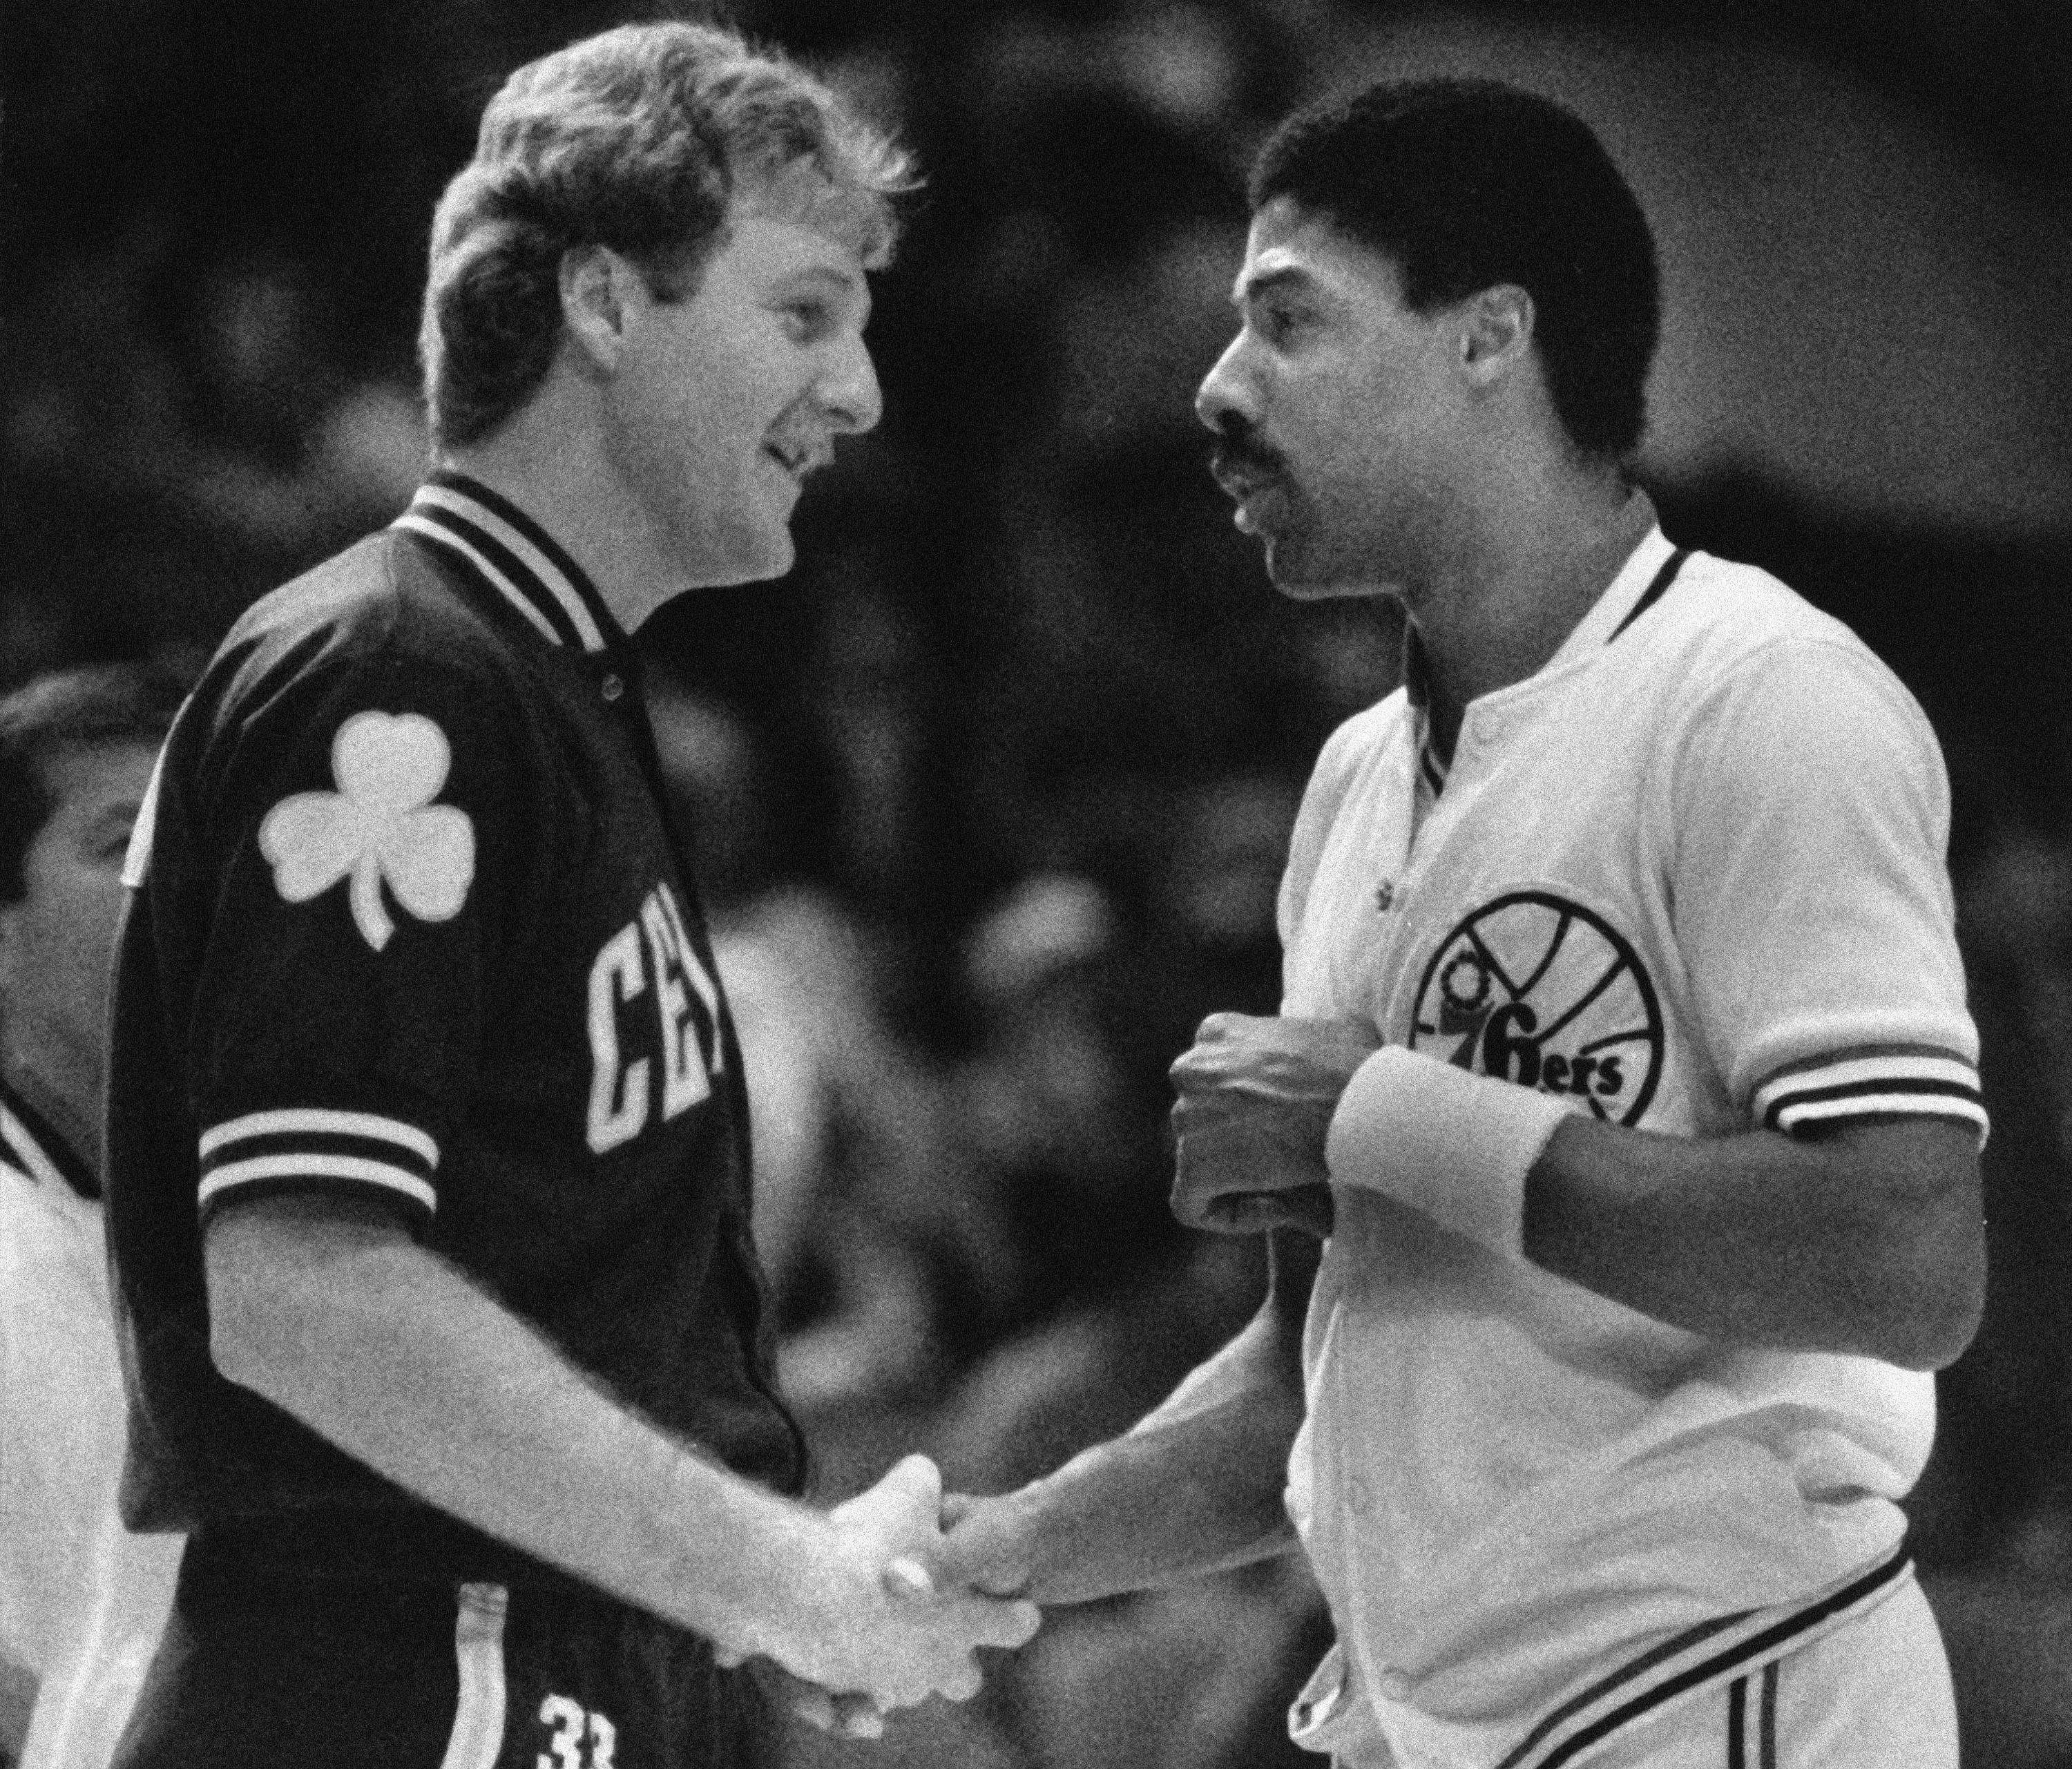 For Larry Bird's Birthday, We Give You the Gift of His Greatest